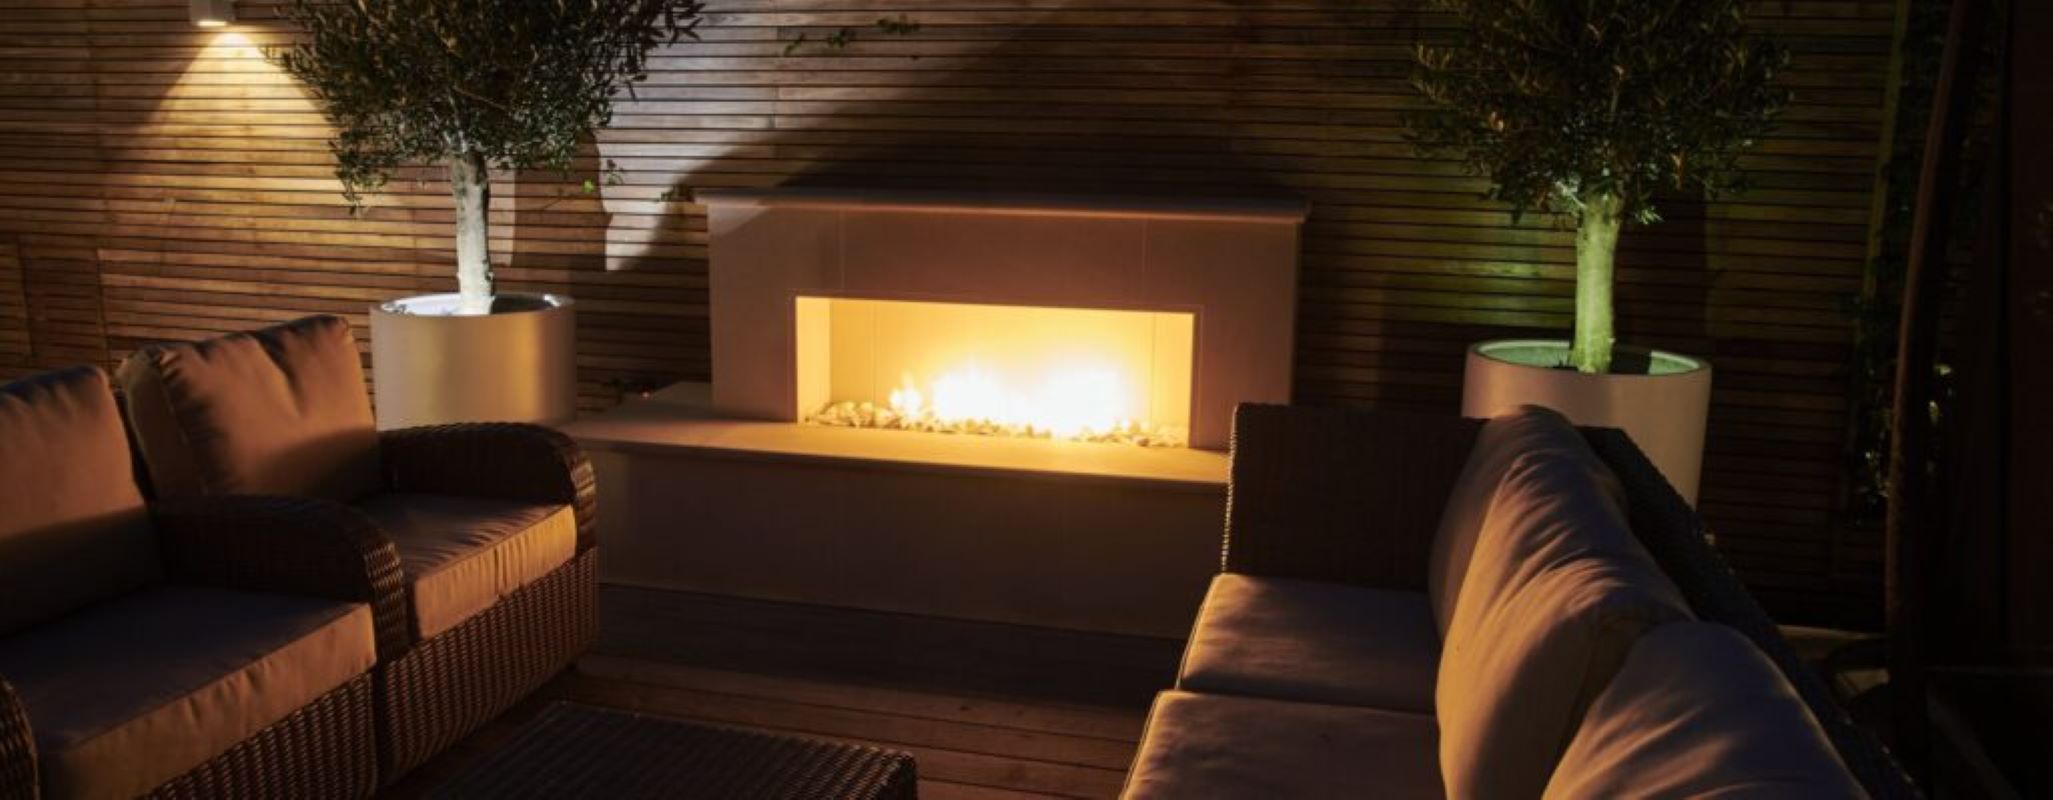 Decking & Fire Place